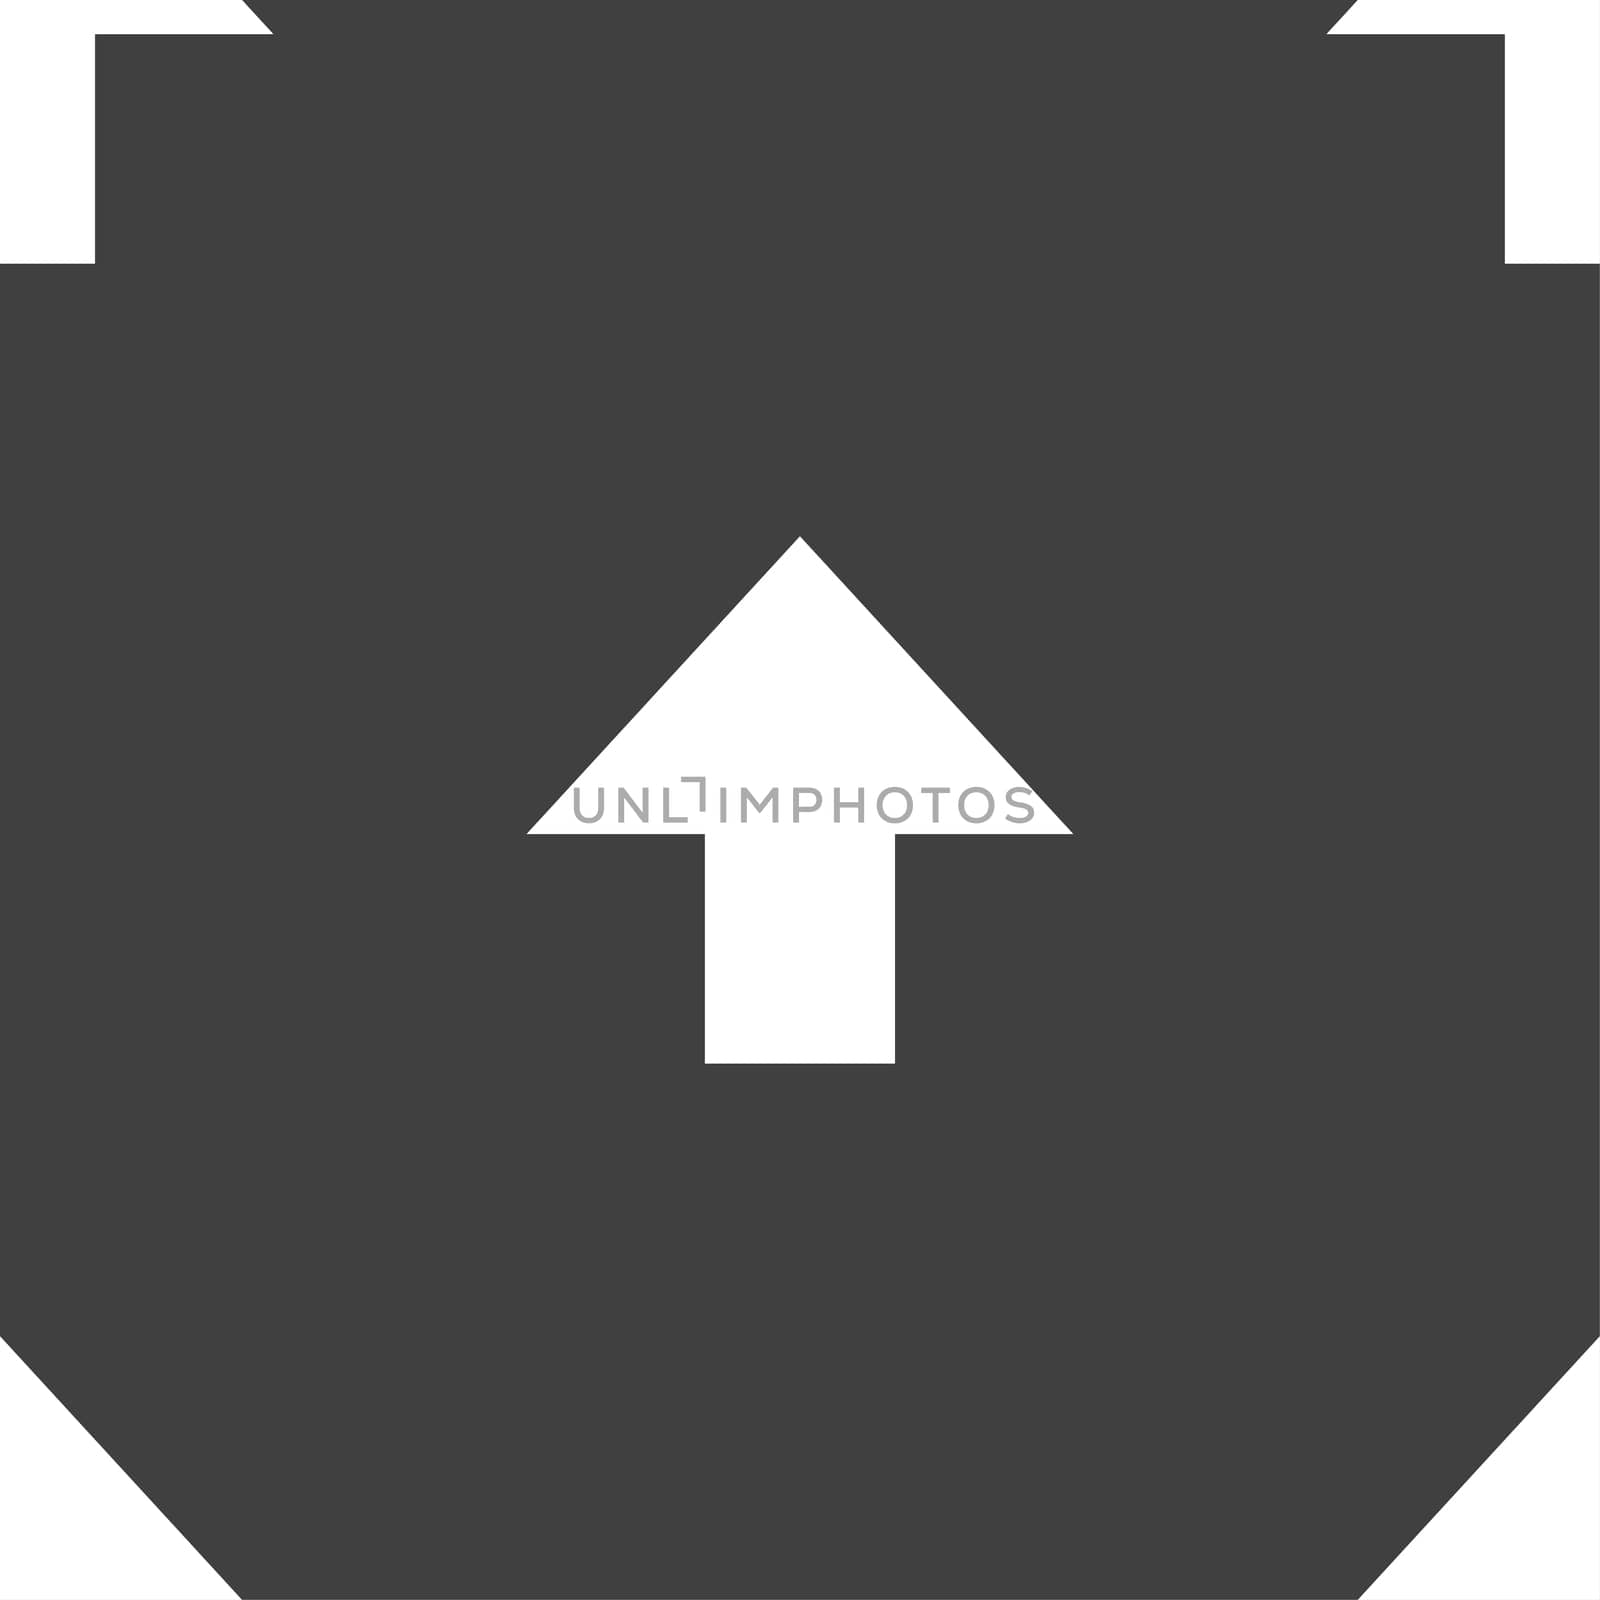 This side up sign icon. Fragile package symbol. Seamless pattern on a gray background. illustration